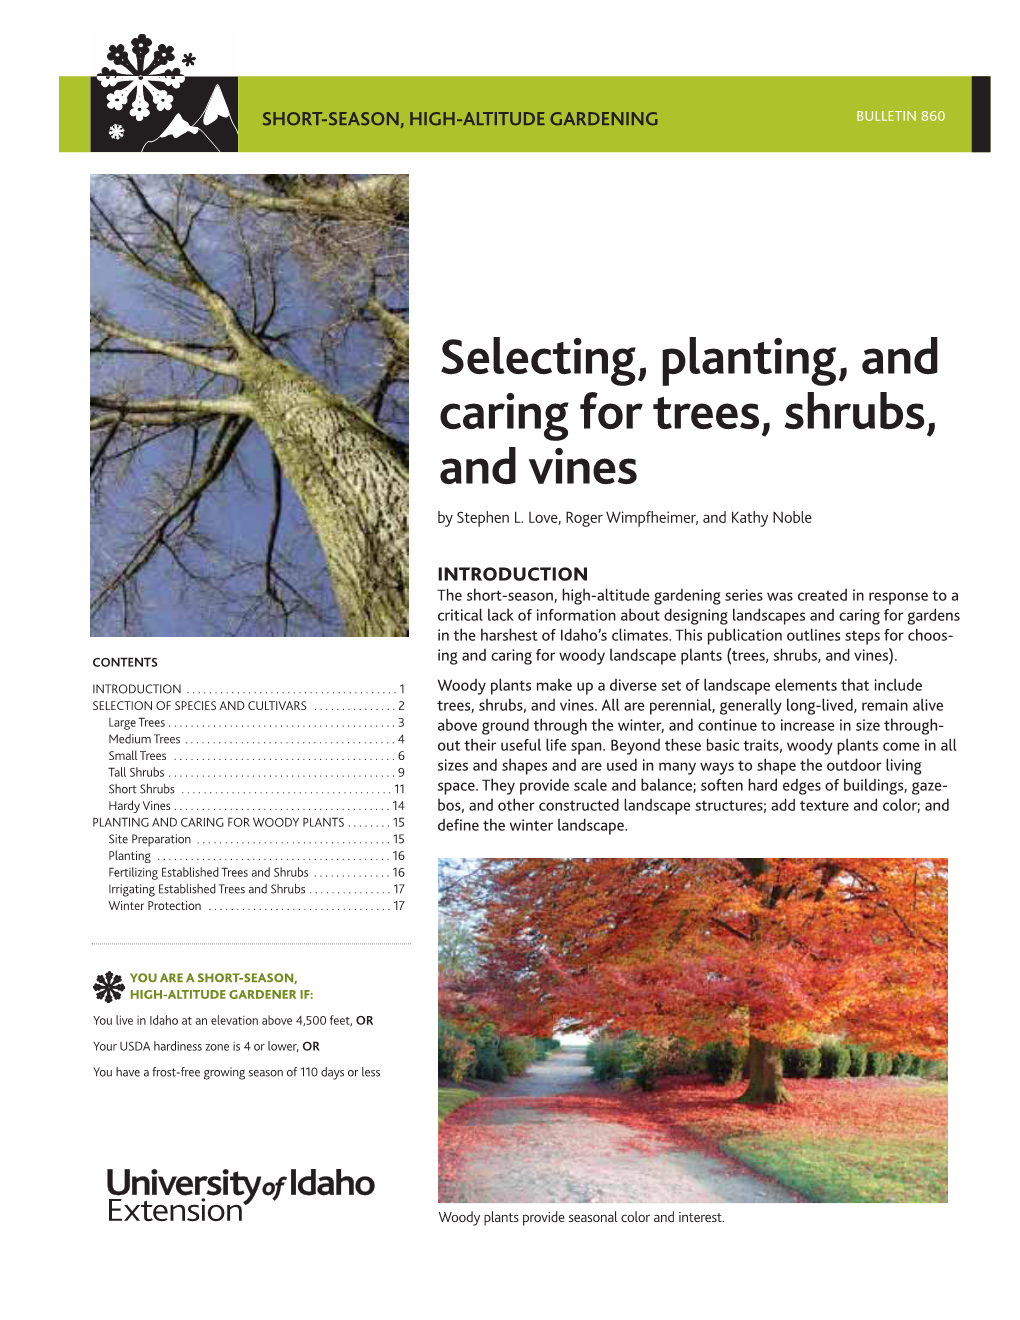 Selecting, Planting, and Caring for Trees, Shrubs, and Vines by Stephen L